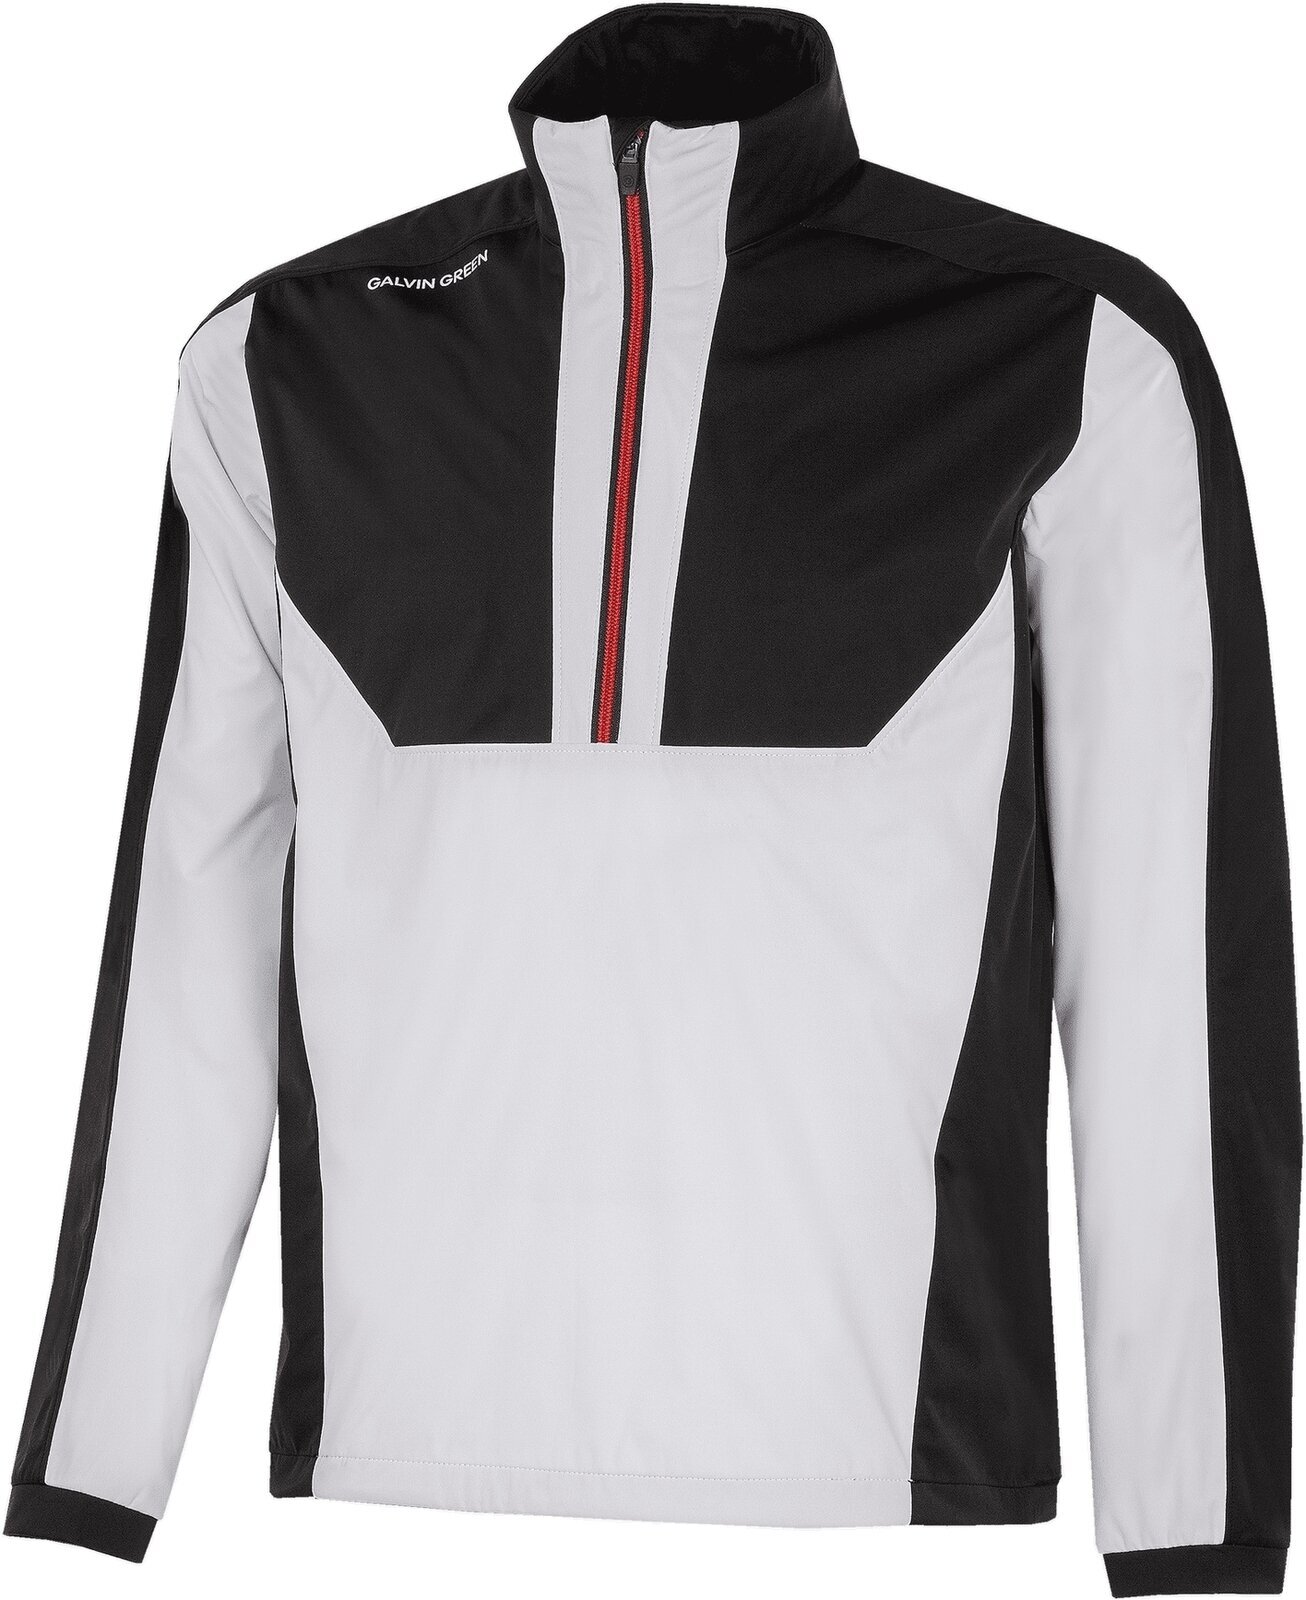 Jakna Galvin Green Lawrence Mens Windproof And Water Repellent Jacket White/Black/Red XL